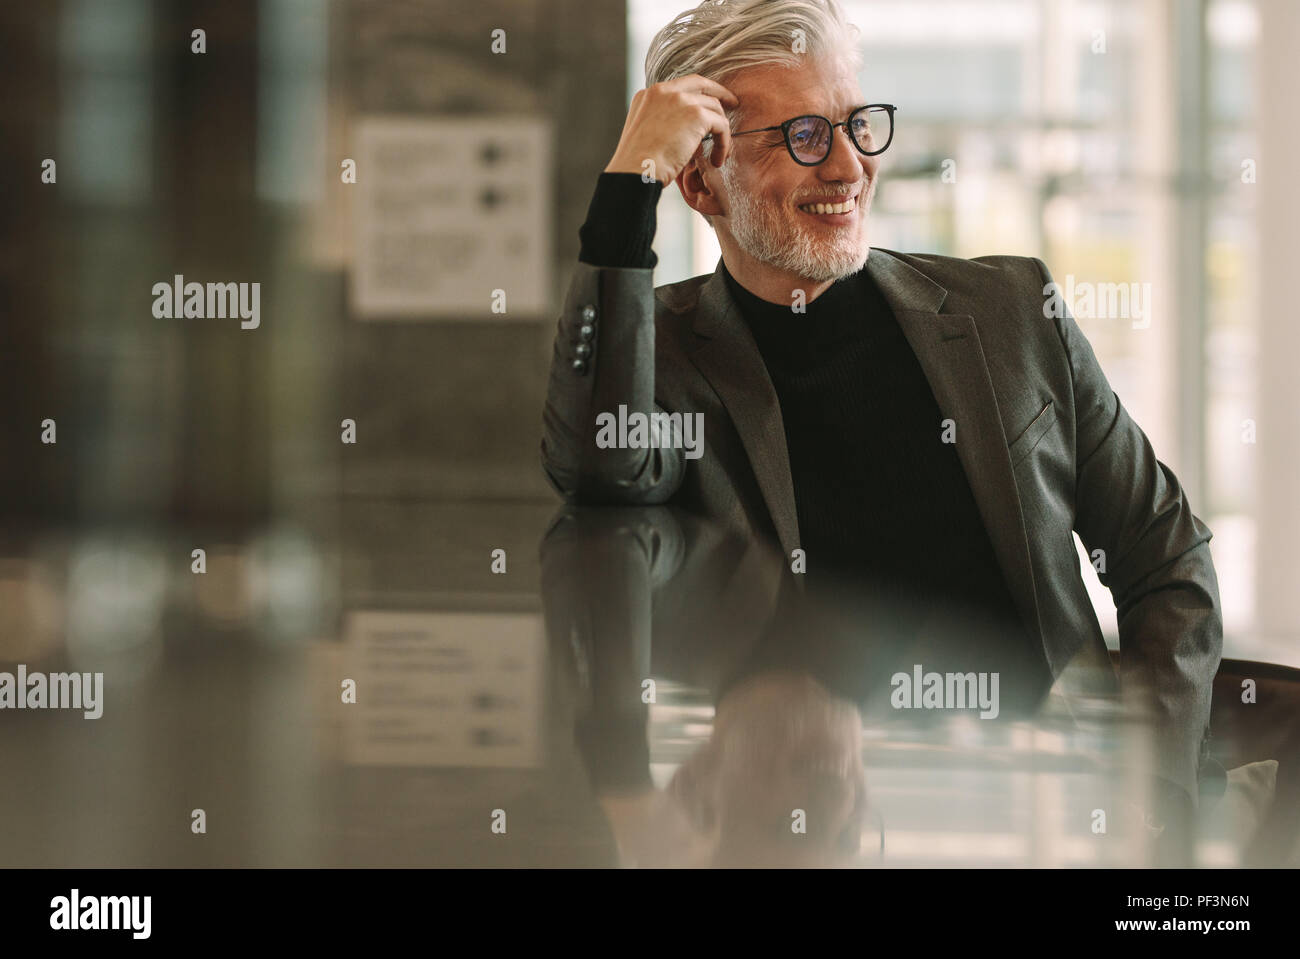 Senior business man relaxing at cafe. Mature man sitting at coffee shop counter and looking away smiling. Stock Photo